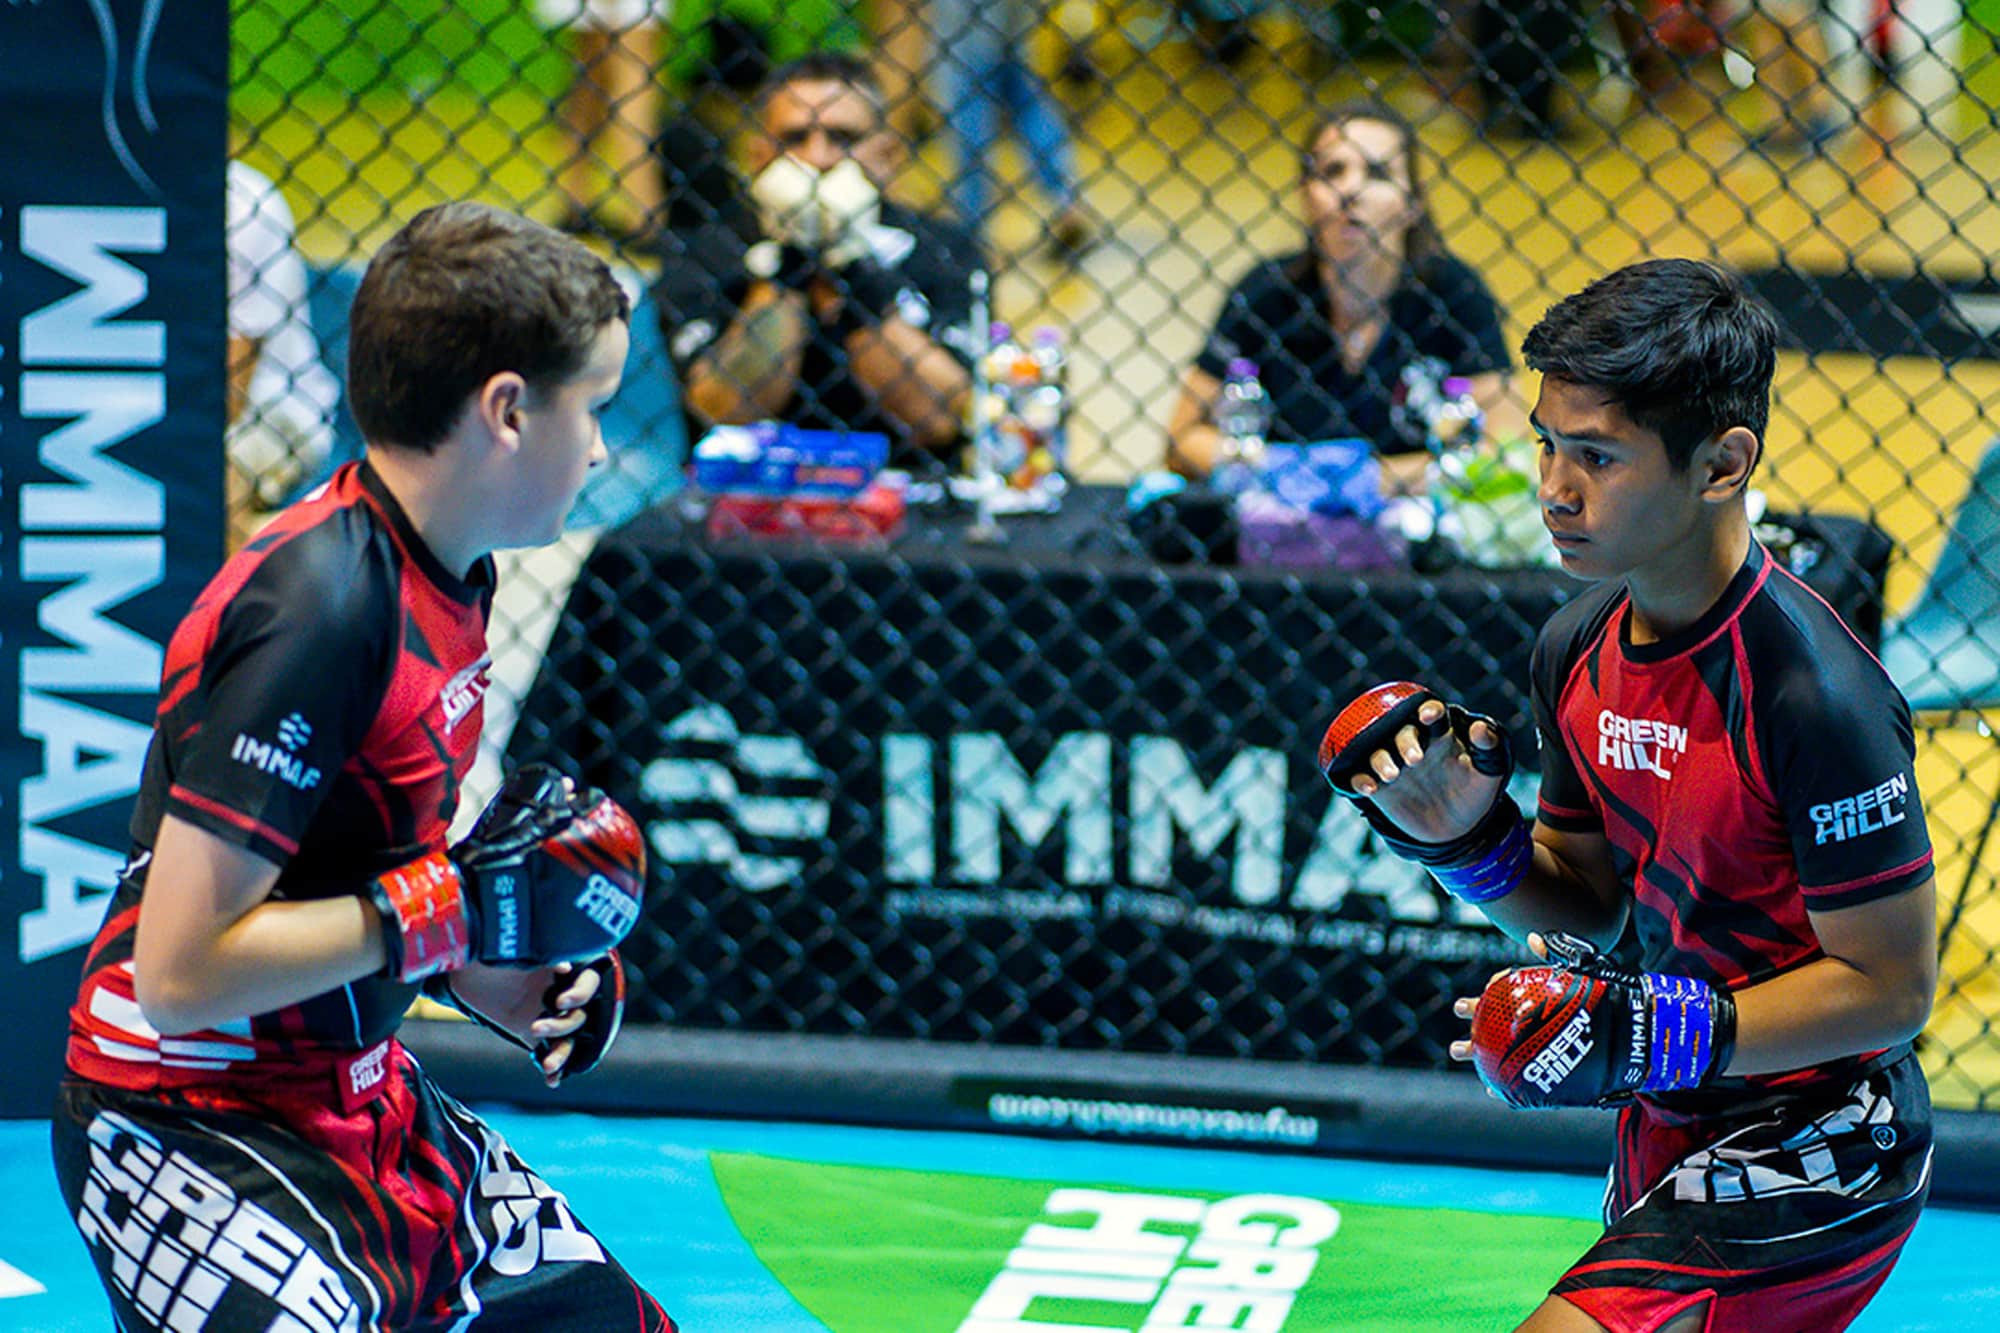 The International Mixed Martial Arts Federation has established its Anti-Doping Disciplinary Committee ©IMMAF